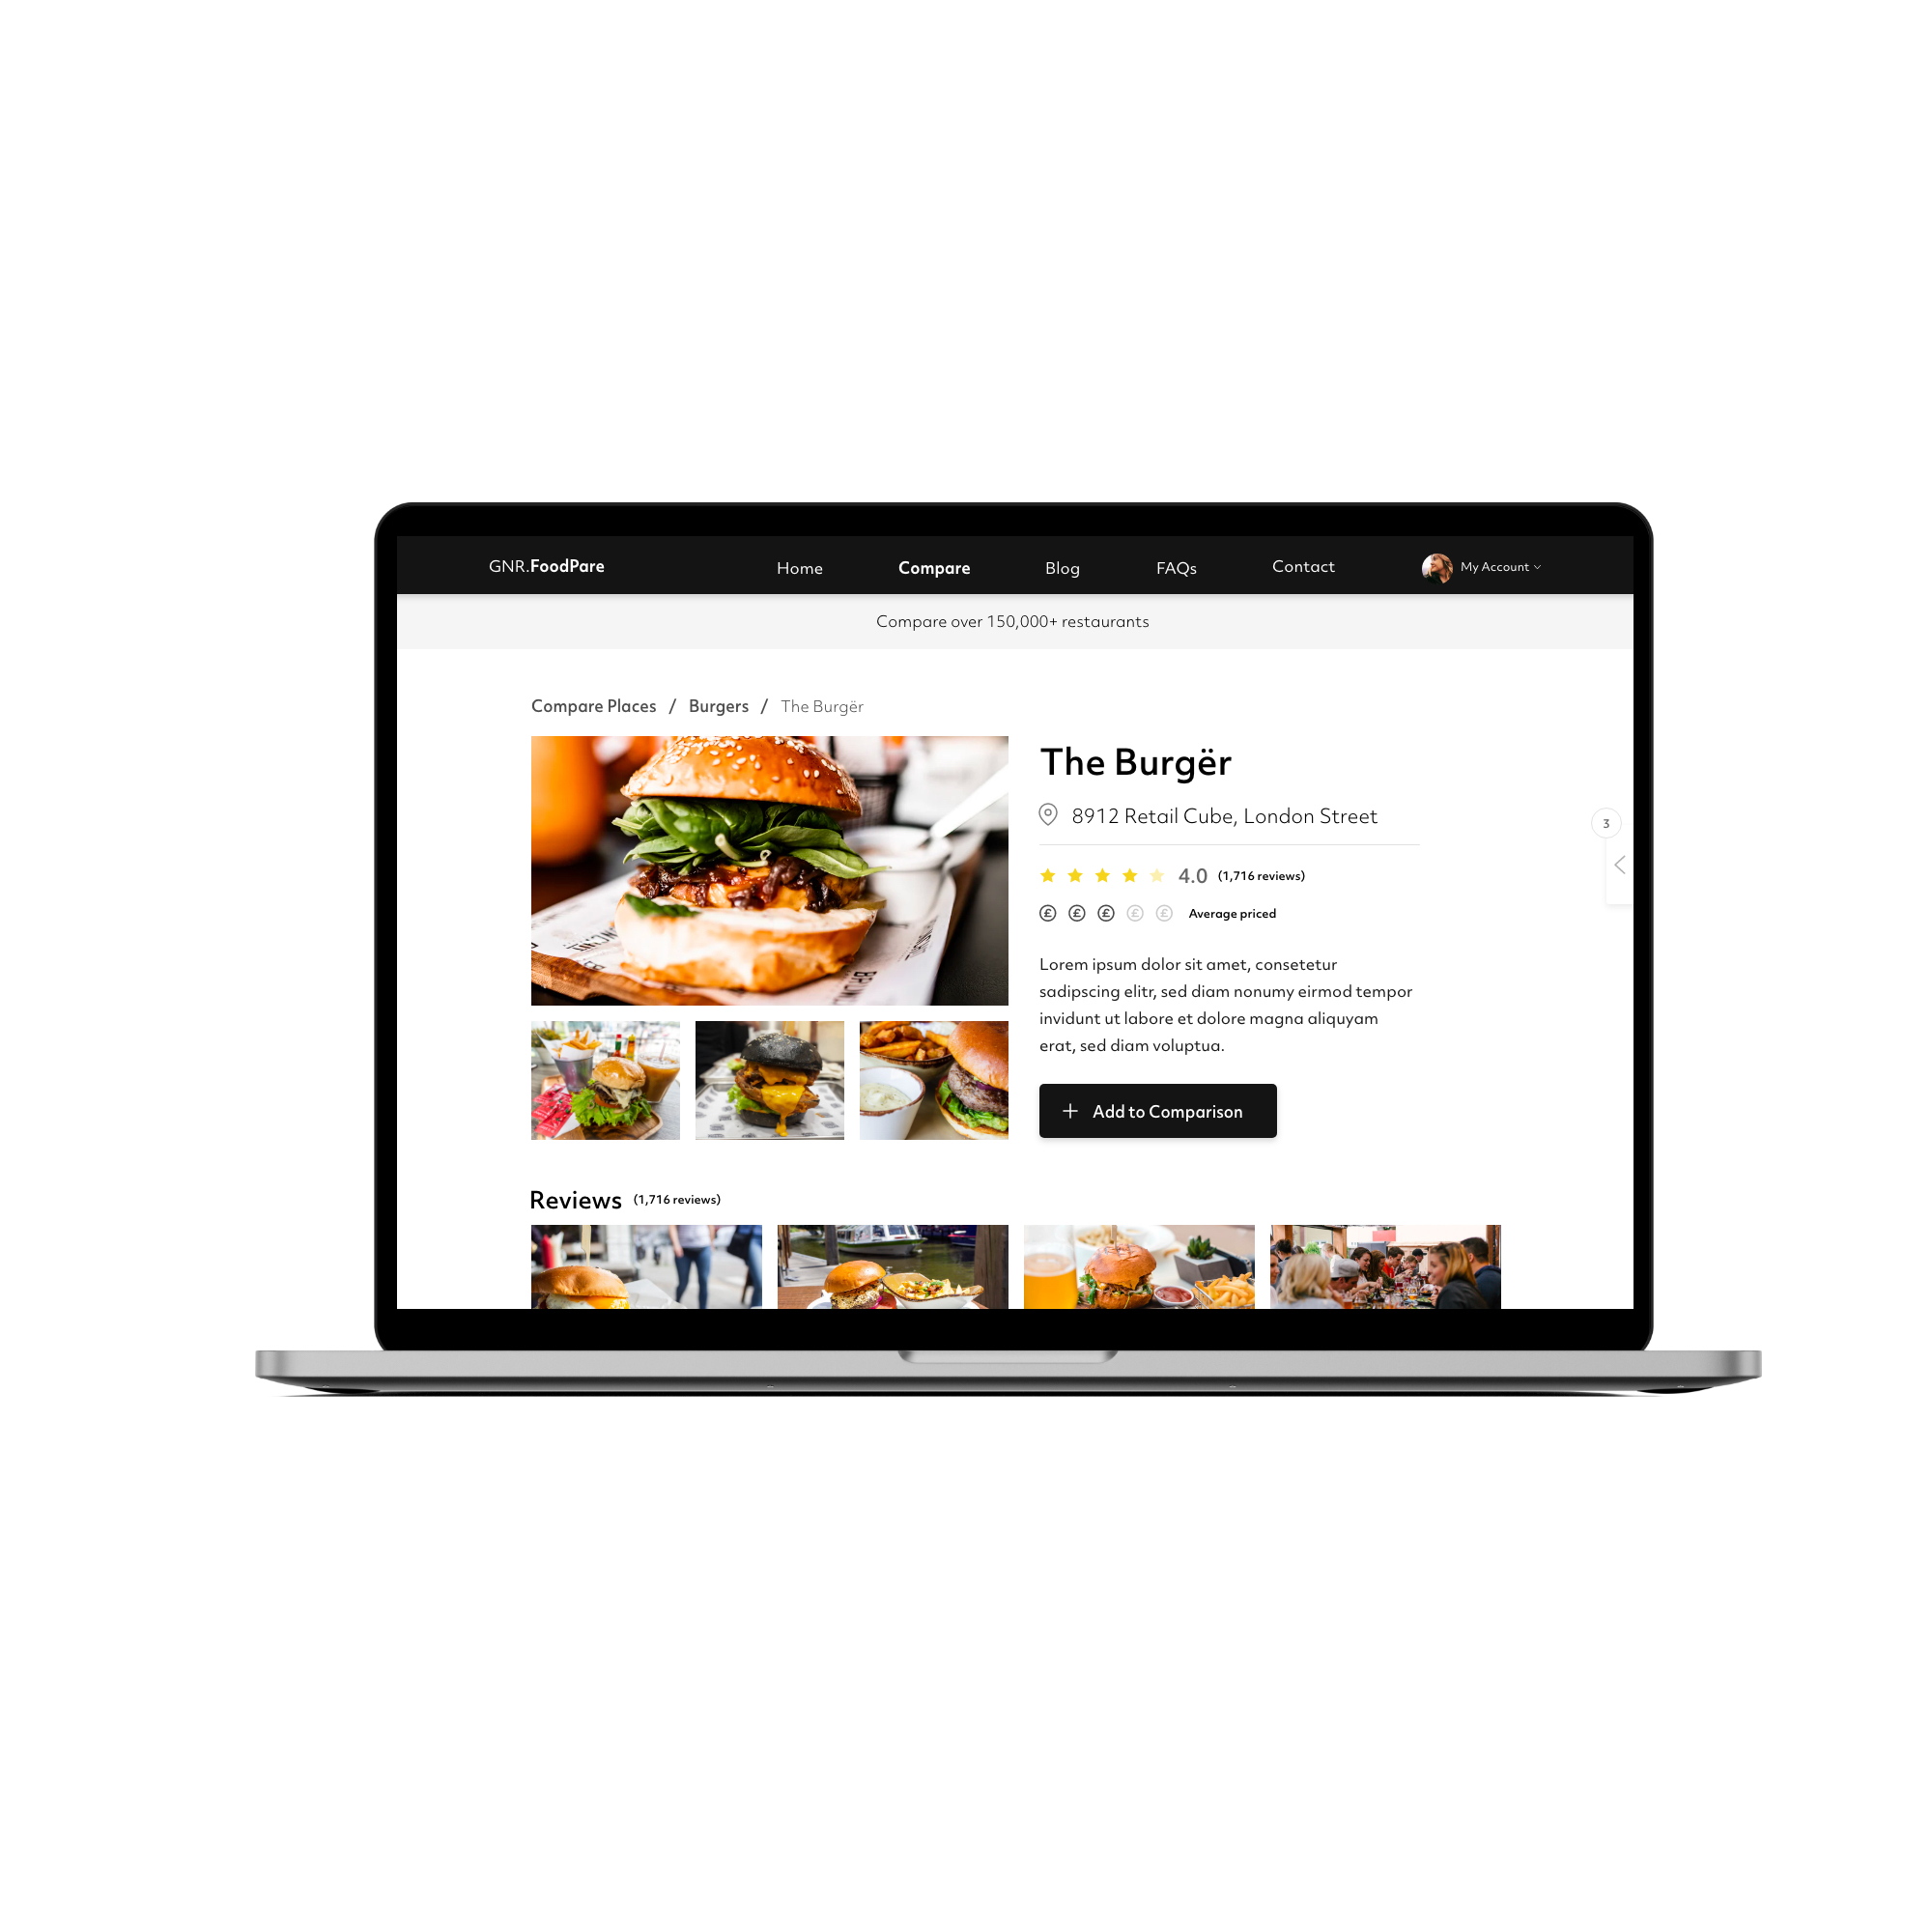 A restaurant's location, description, ratings, expensiveness and reviews with button to add to comparison